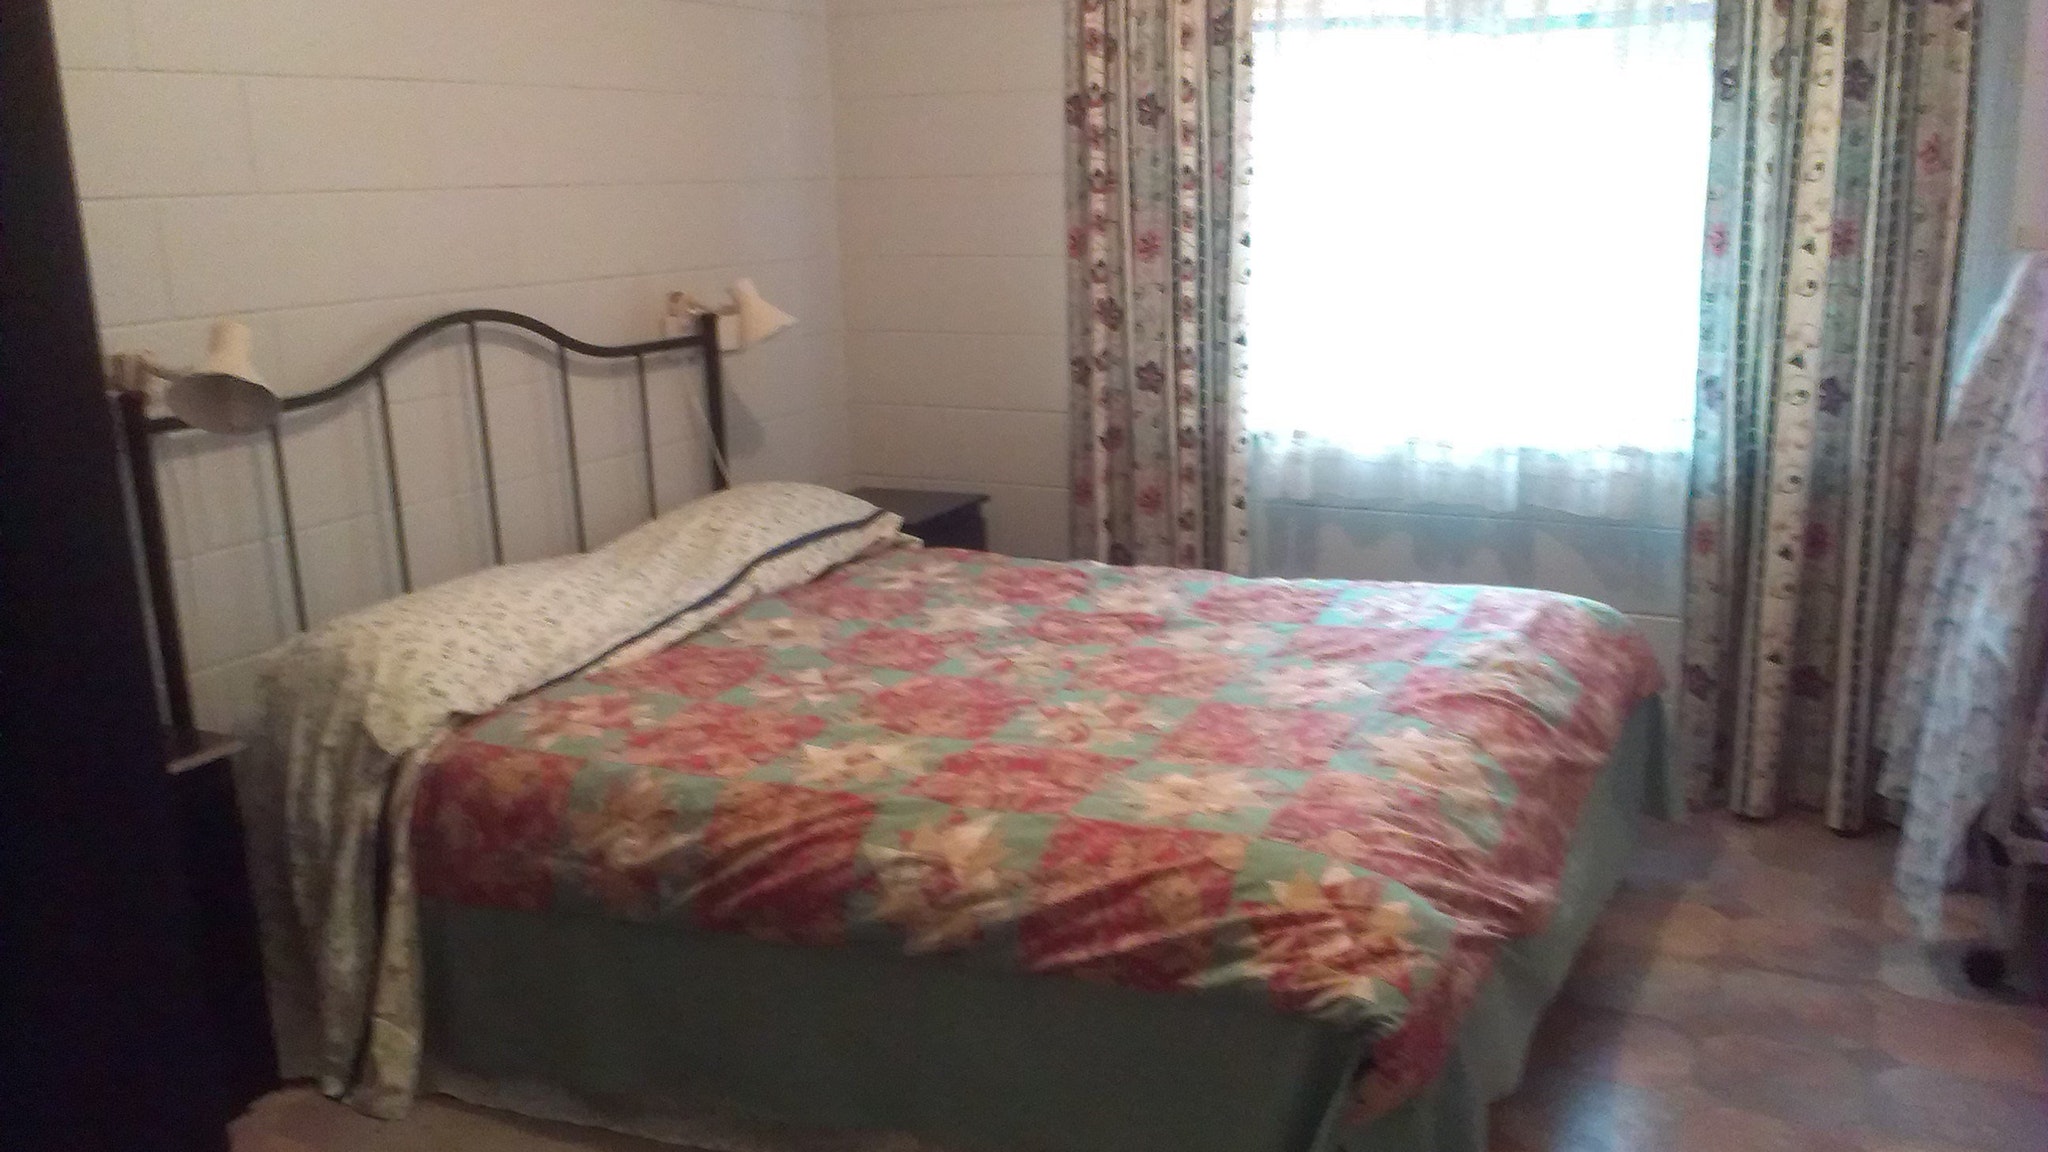 South Australian Country Women's Association Barmera Holiday Cottage - New South Wales Tourism 